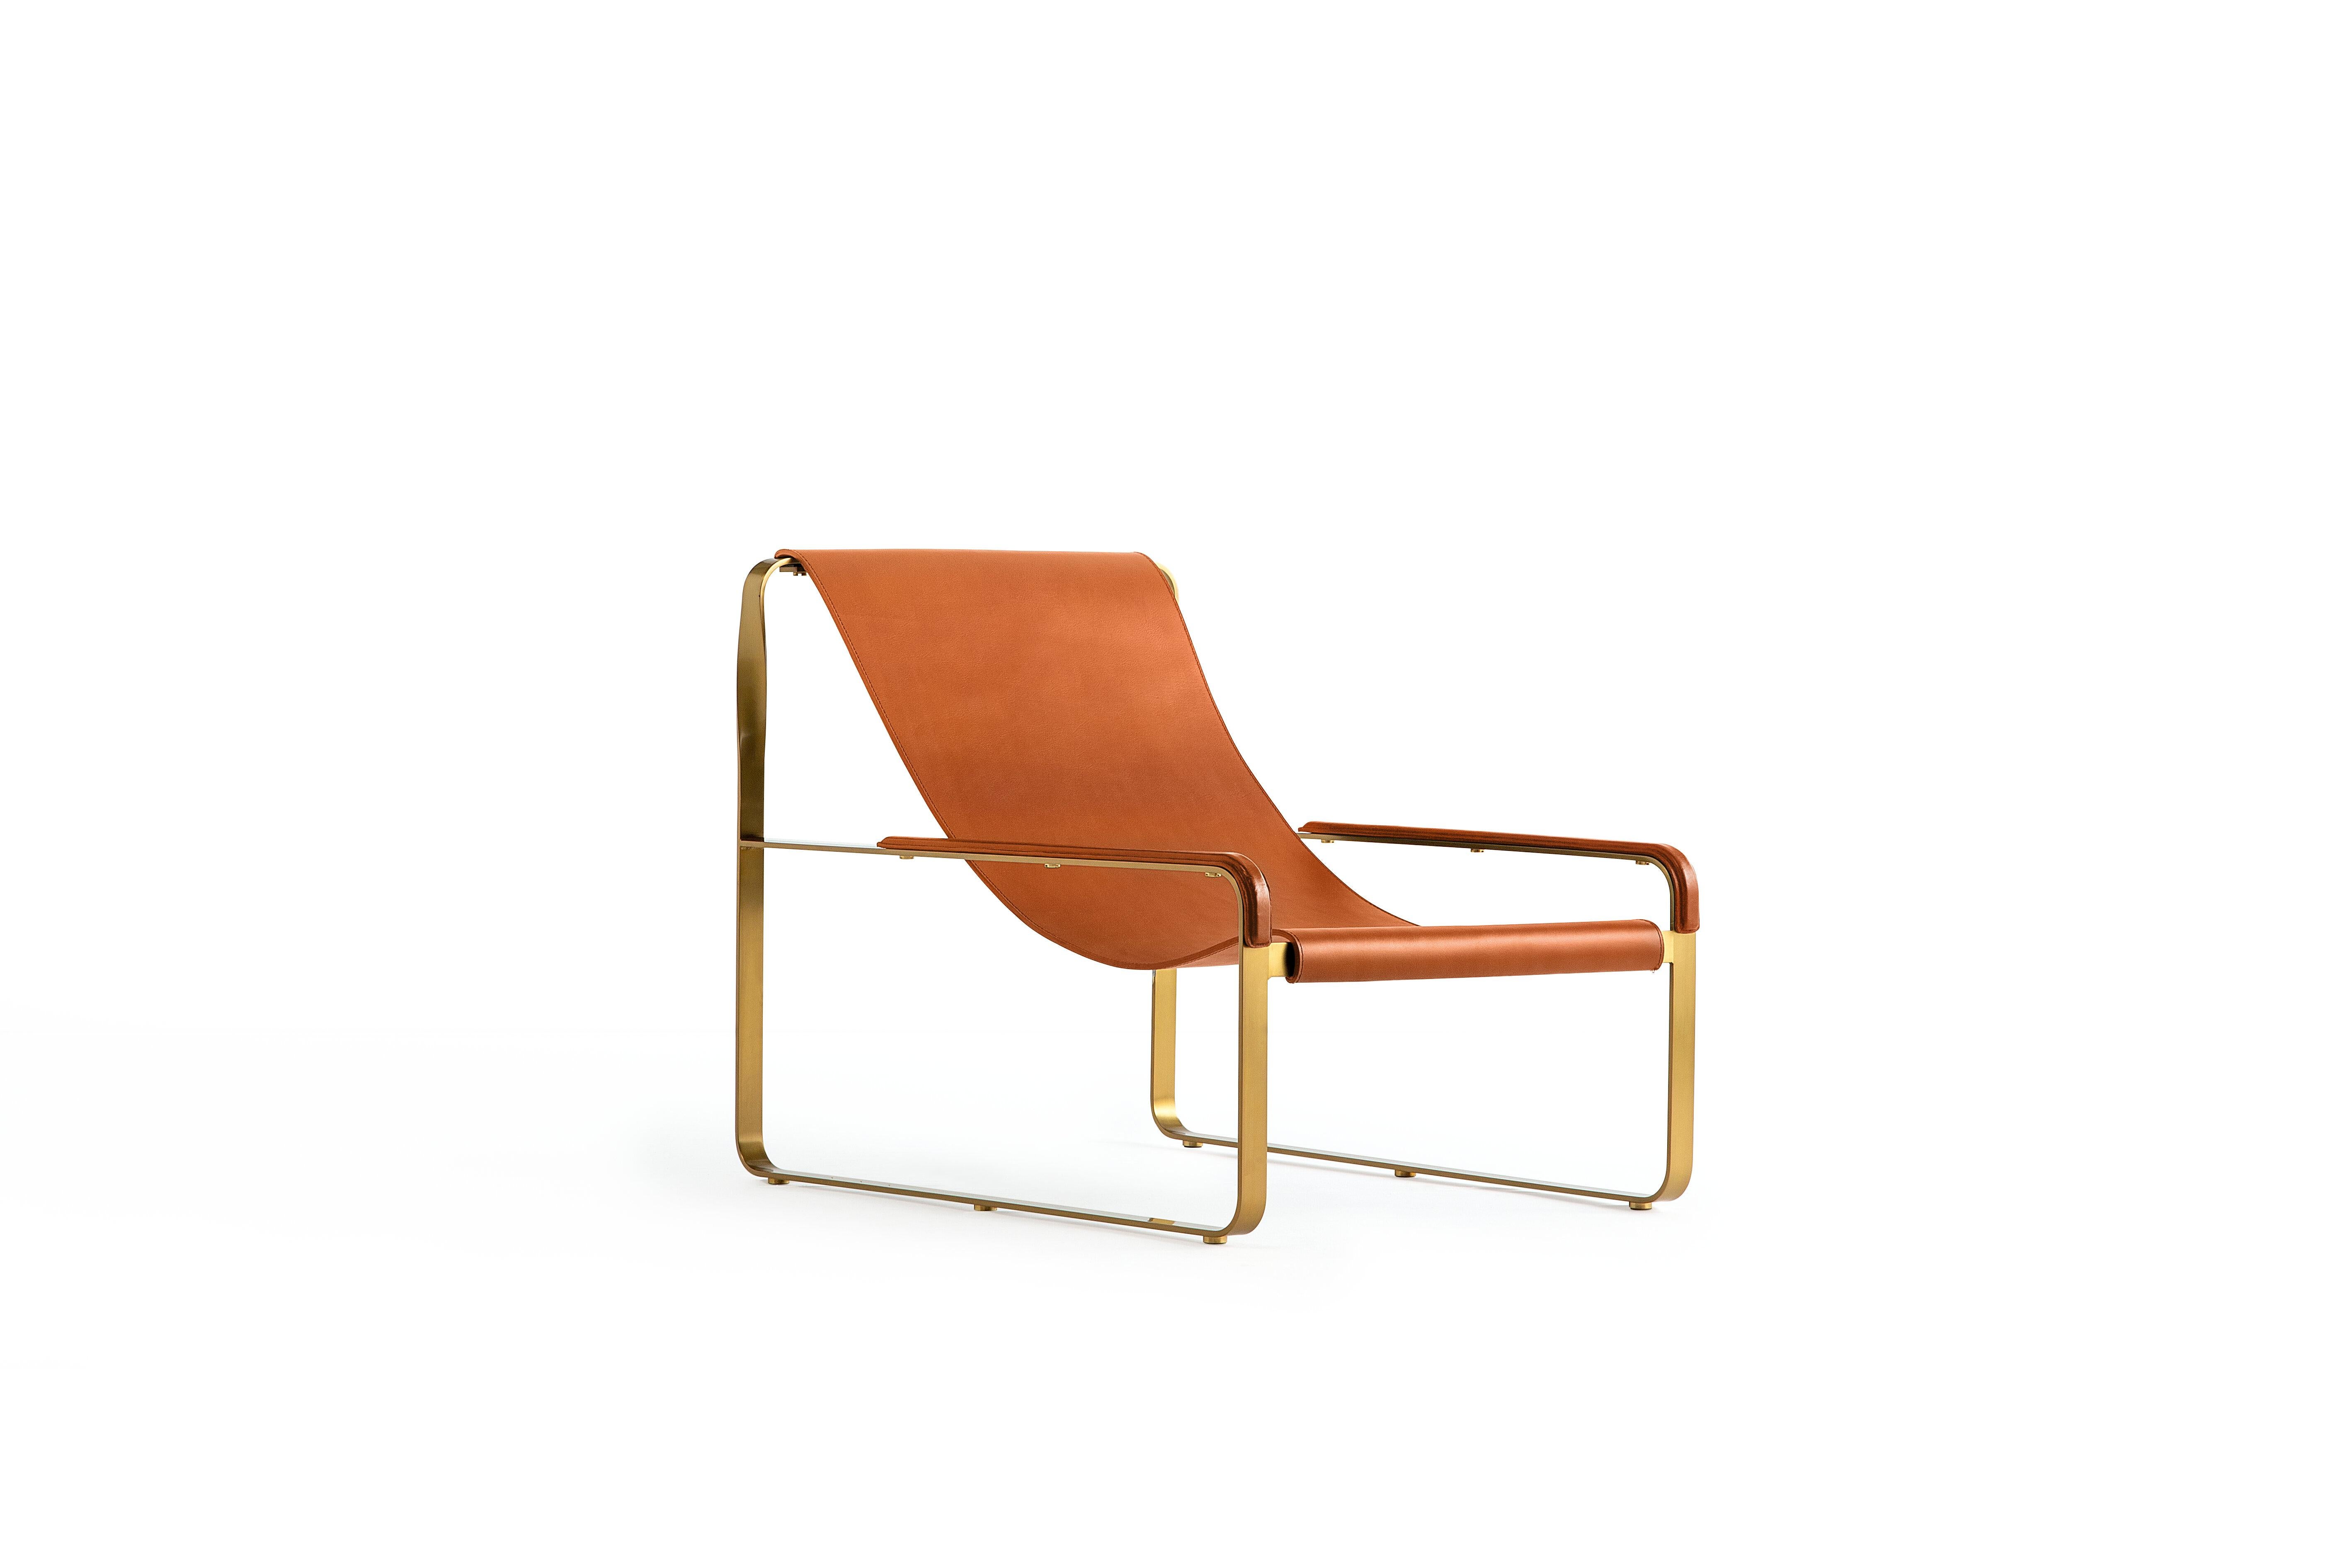 Modern style wanderlust chaise lounge aged brass steel and natural tobacco leather

Serene pieces where exclusivity and precision are shown in small details such as the hand-turned metal nuts and bolts that fix the leather surfaces, that go